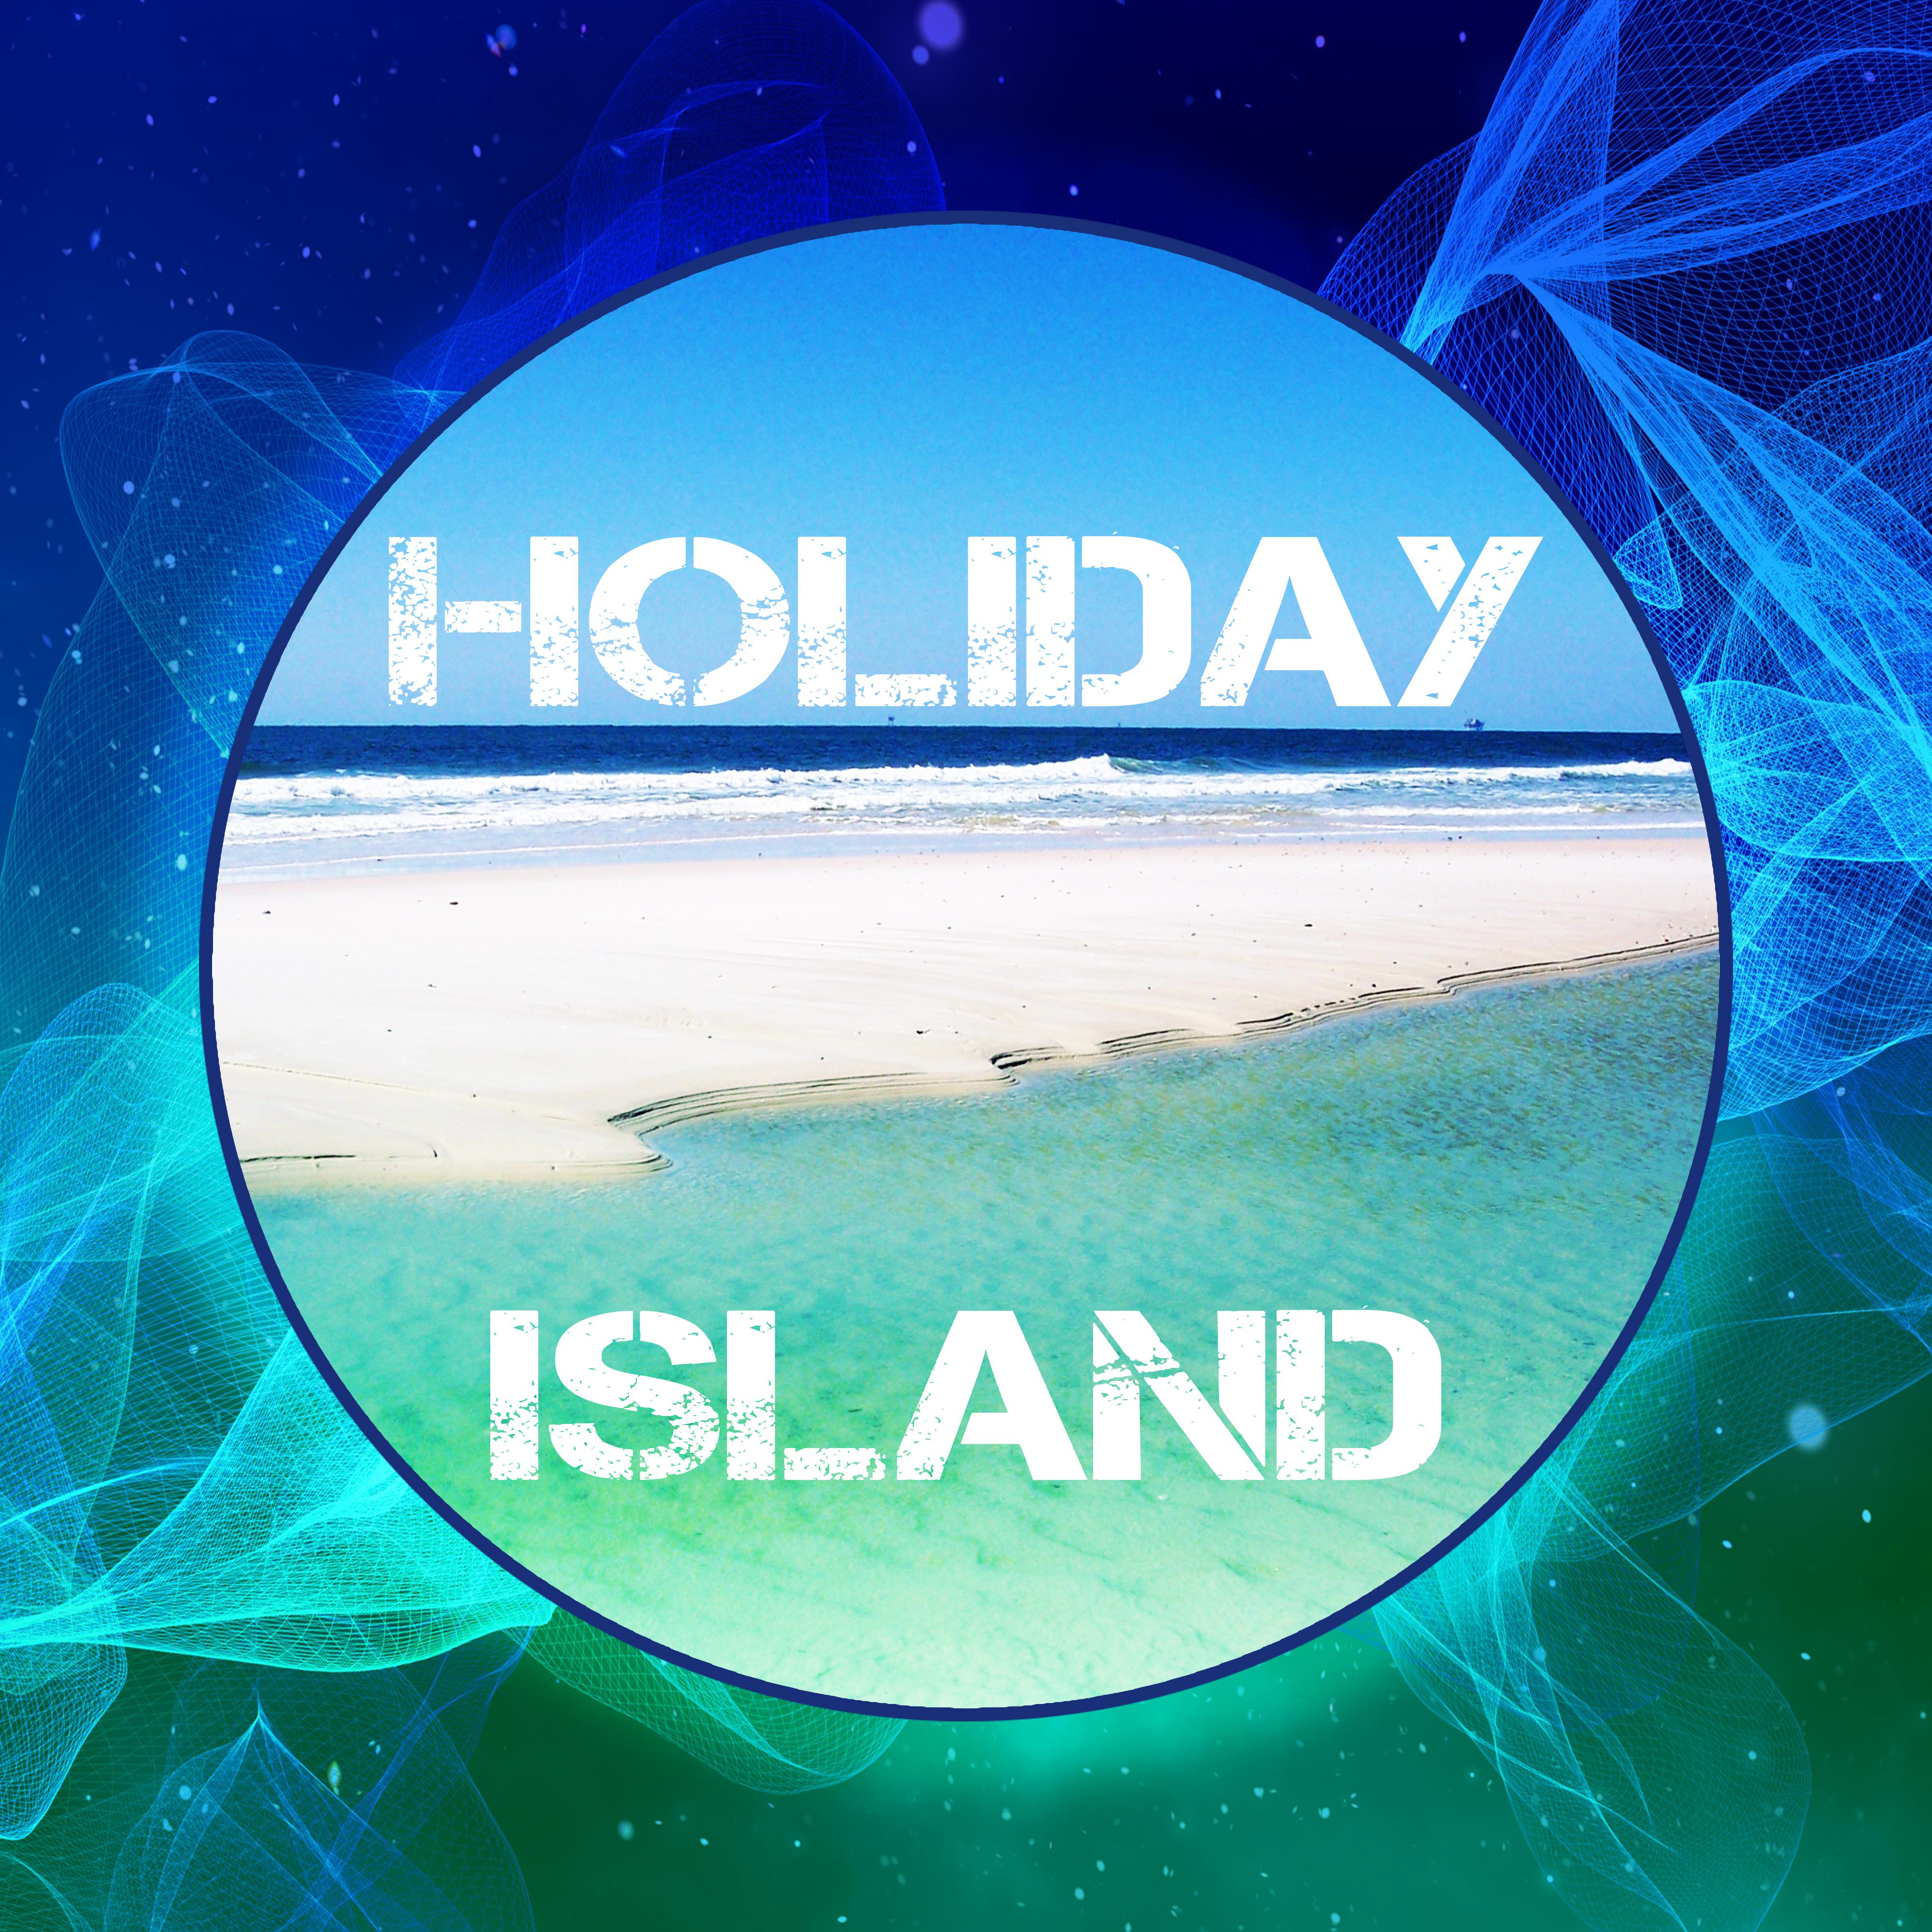 Holiday Island  Peaceful Music for Relaxation, Deep Chill Out Music, Sounds of Sea, Cocktail  Drinks, Summertime, Ethnic Music